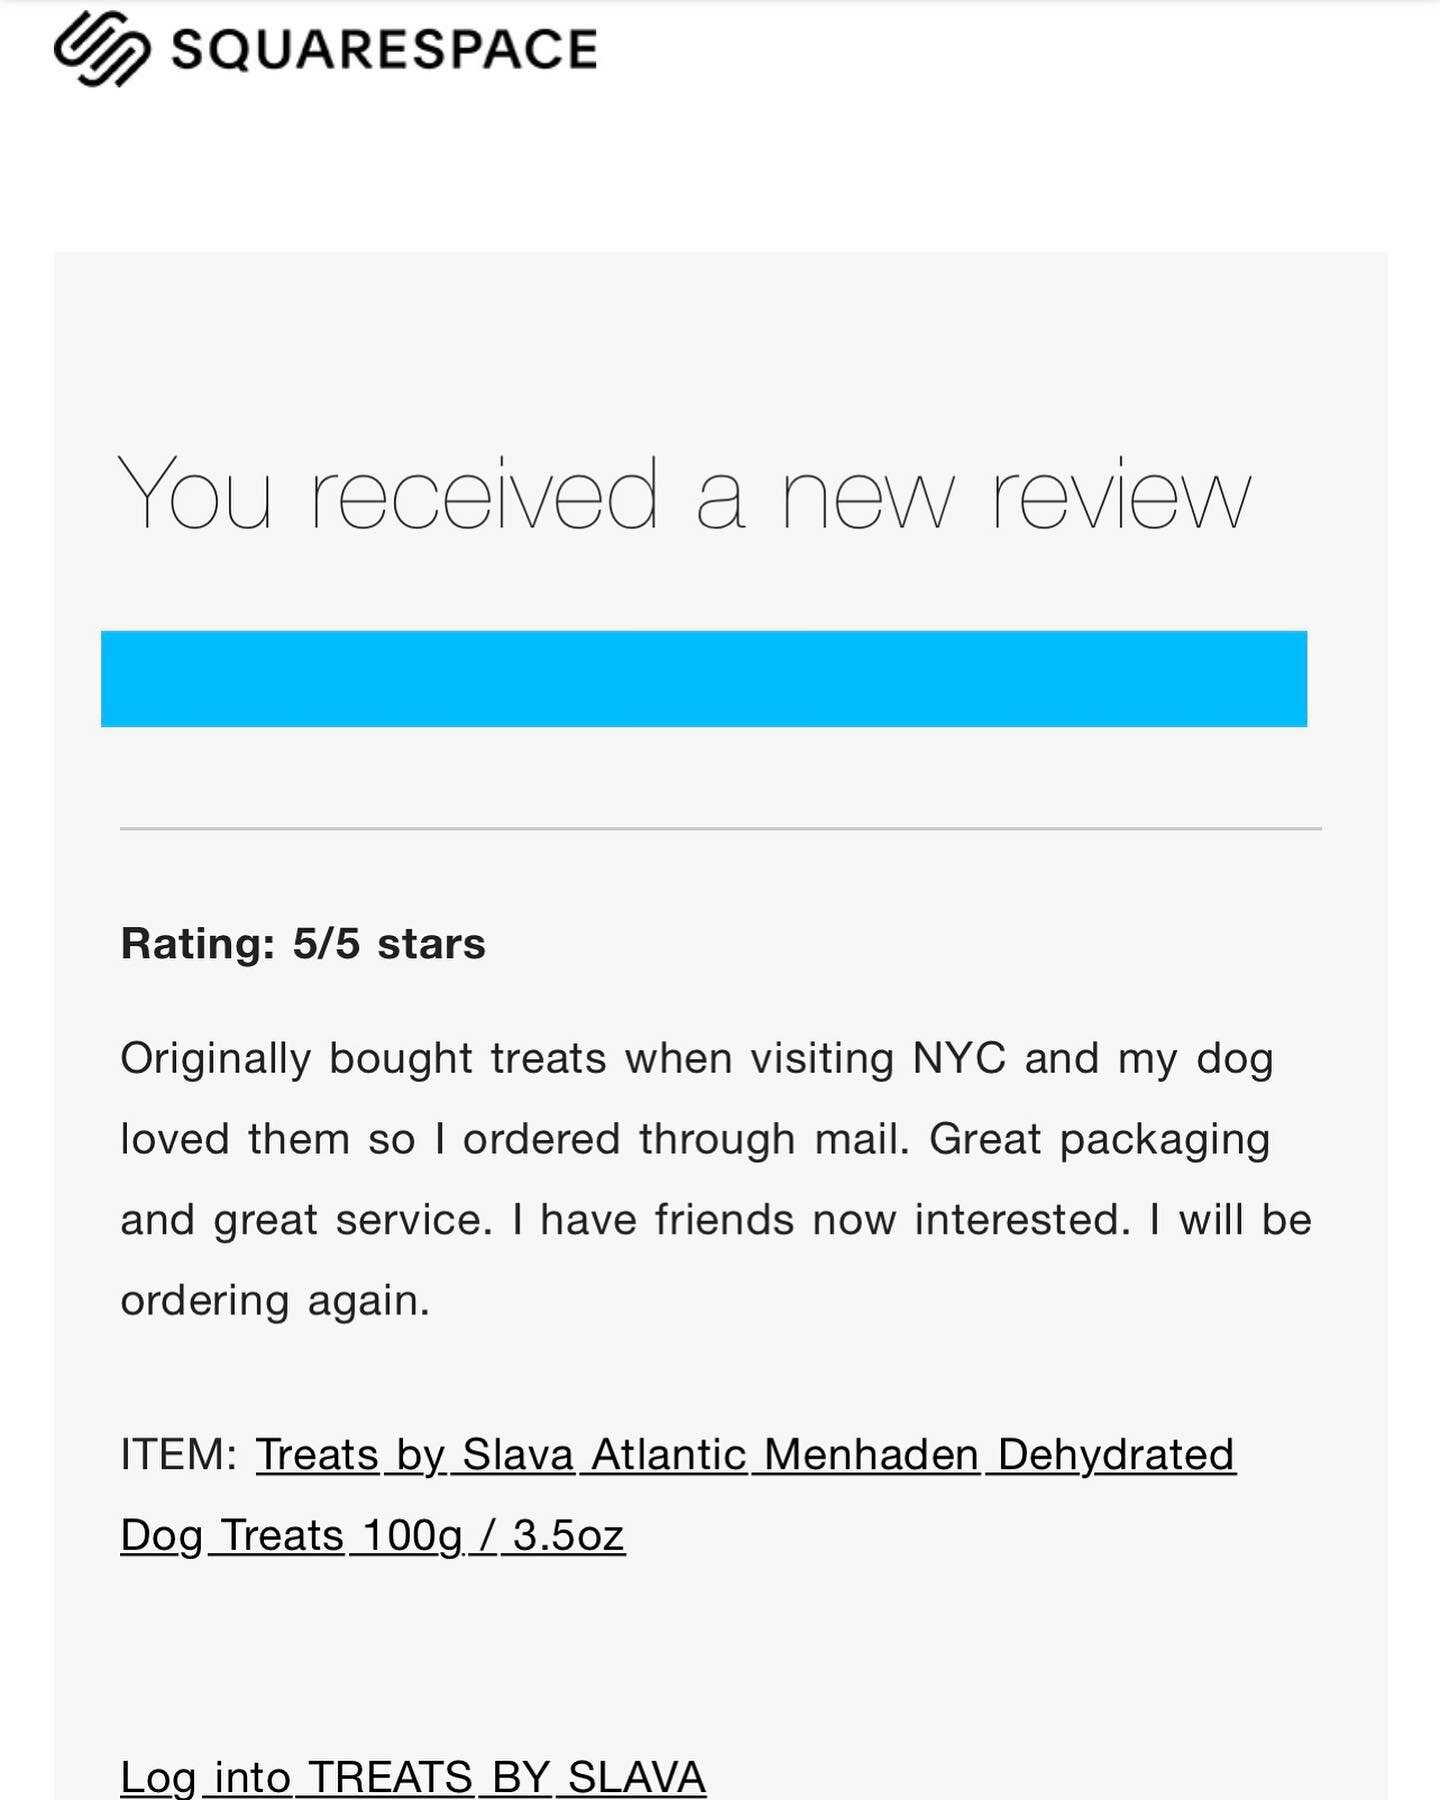 5/5 
⭐️⭐️⭐️⭐️⭐️

OUR VERY FIRST 5 STAR REVIEW!!
This is Heartfelt!! 
Thank you for sharing your review!🤩

Please order our product for your dogs this Holiday Season 
And Avail our Free Delivery in Local NYC Area! 

Visit our website 
👉👉Link in Bio